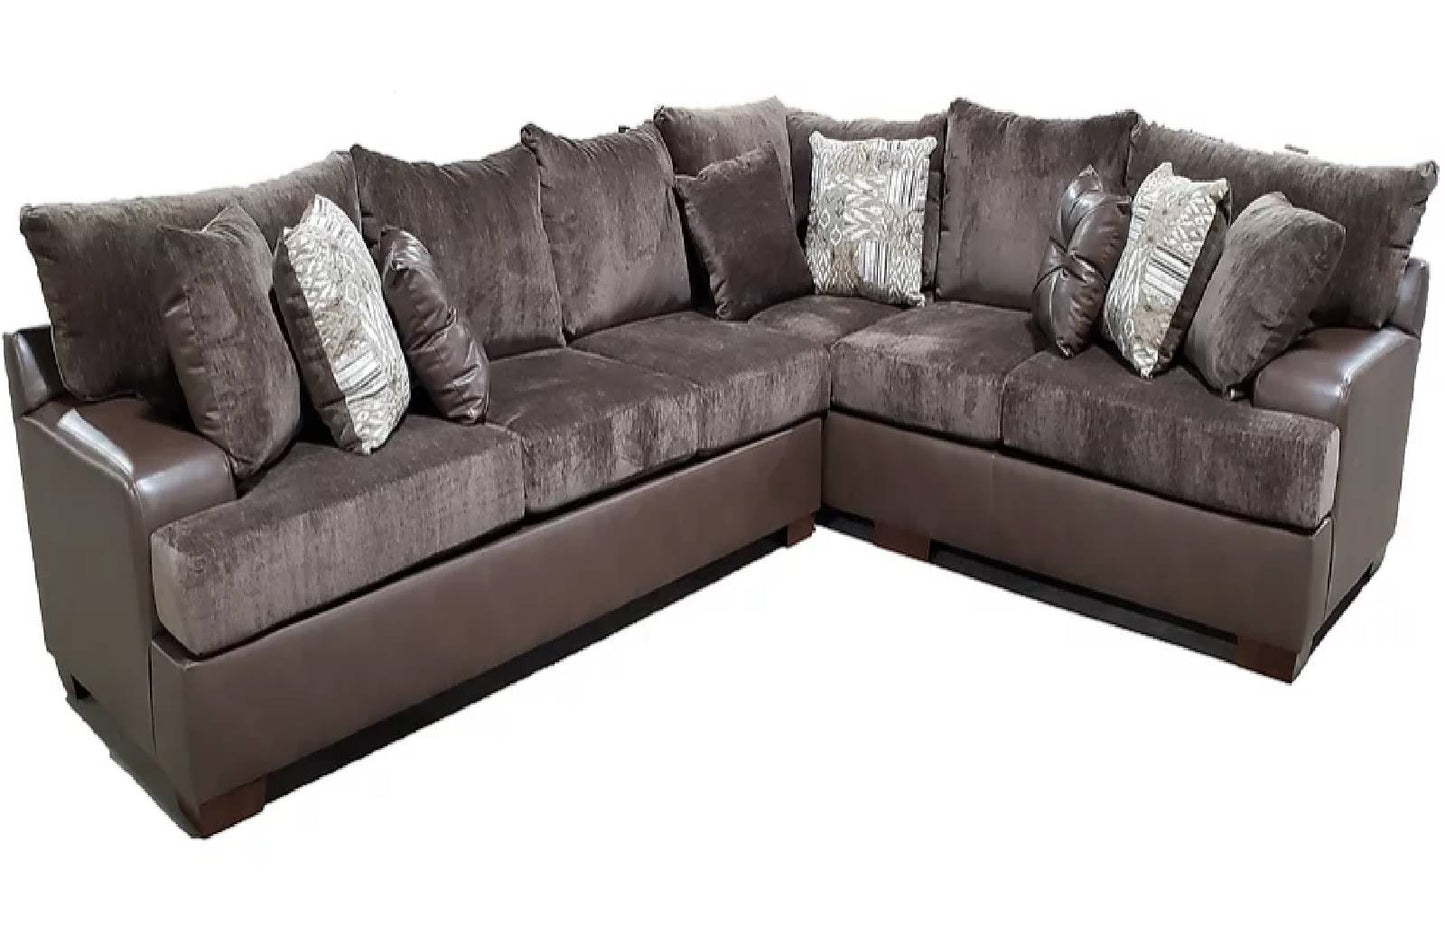 S8080 King Ranch Sectional